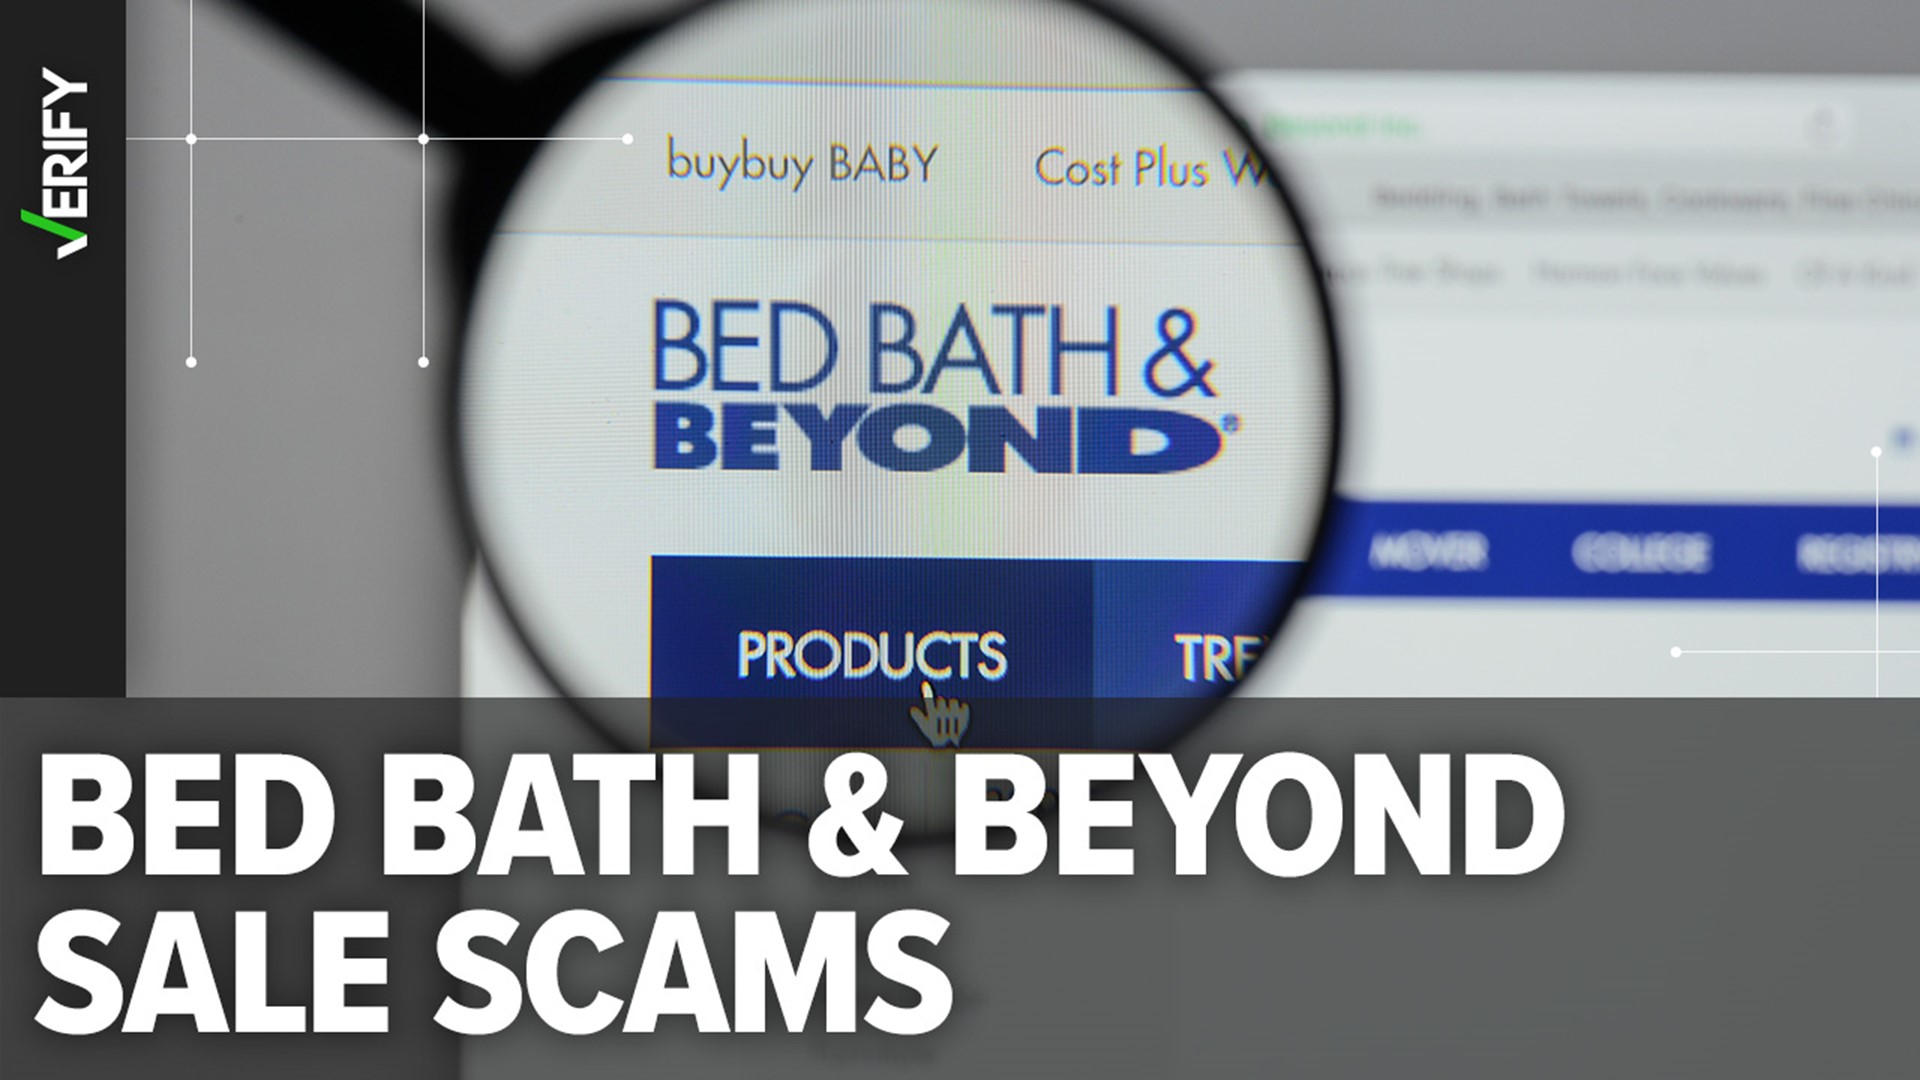 In April, Bed, Bath & Beyond filed for bankruptcy and closed hundreds of stores. Scammers have since been using store branding to steal your personal information.